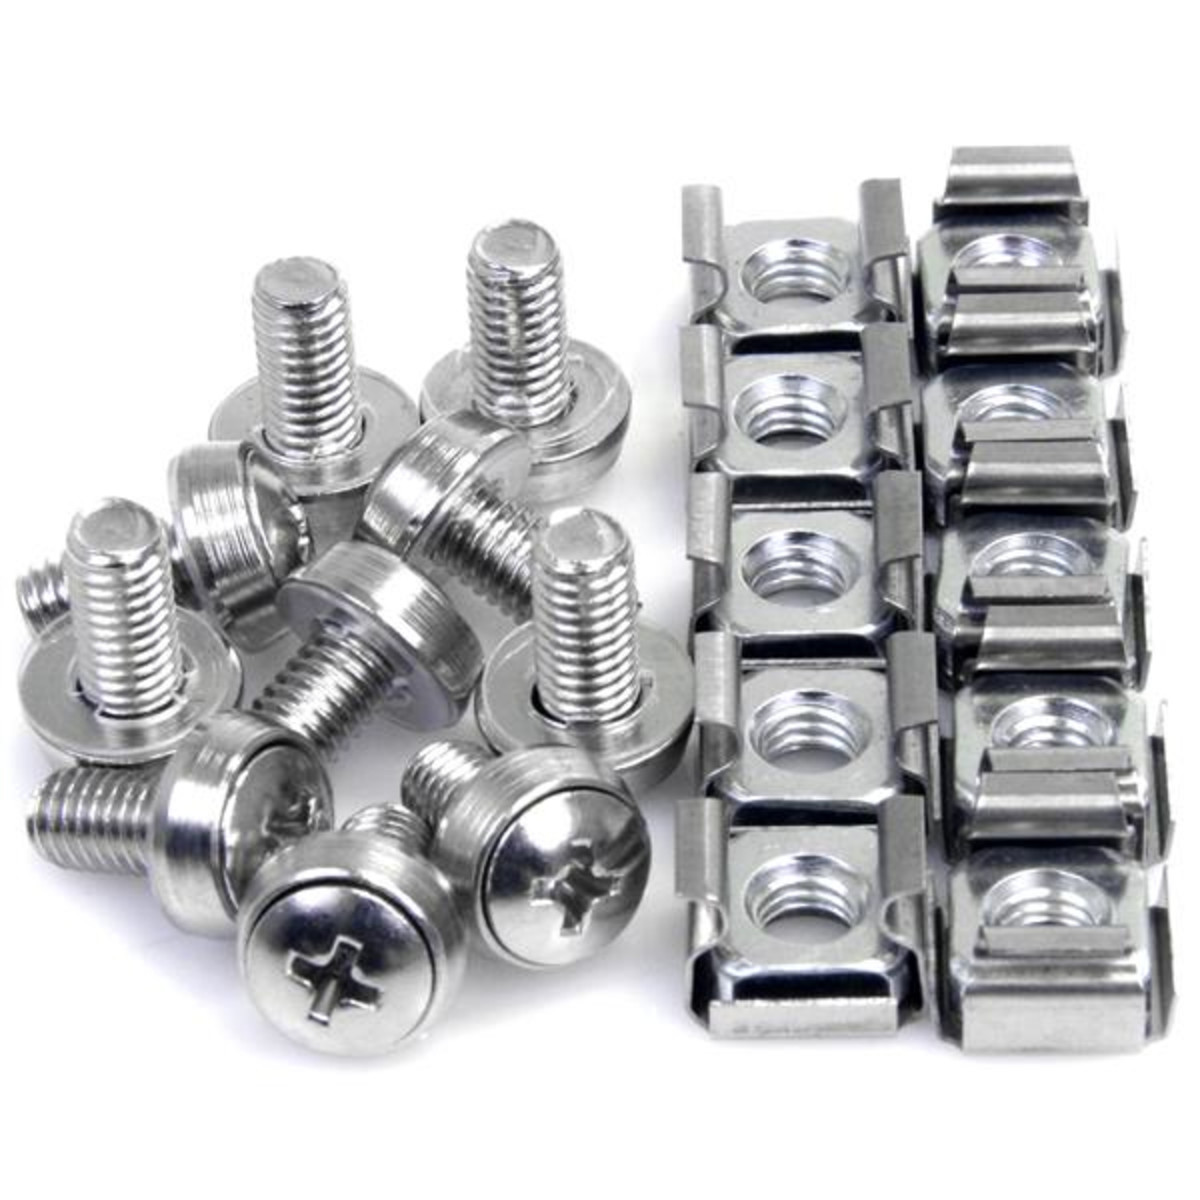 50 Pkg M6 Mounting Screws and Cage Nuts